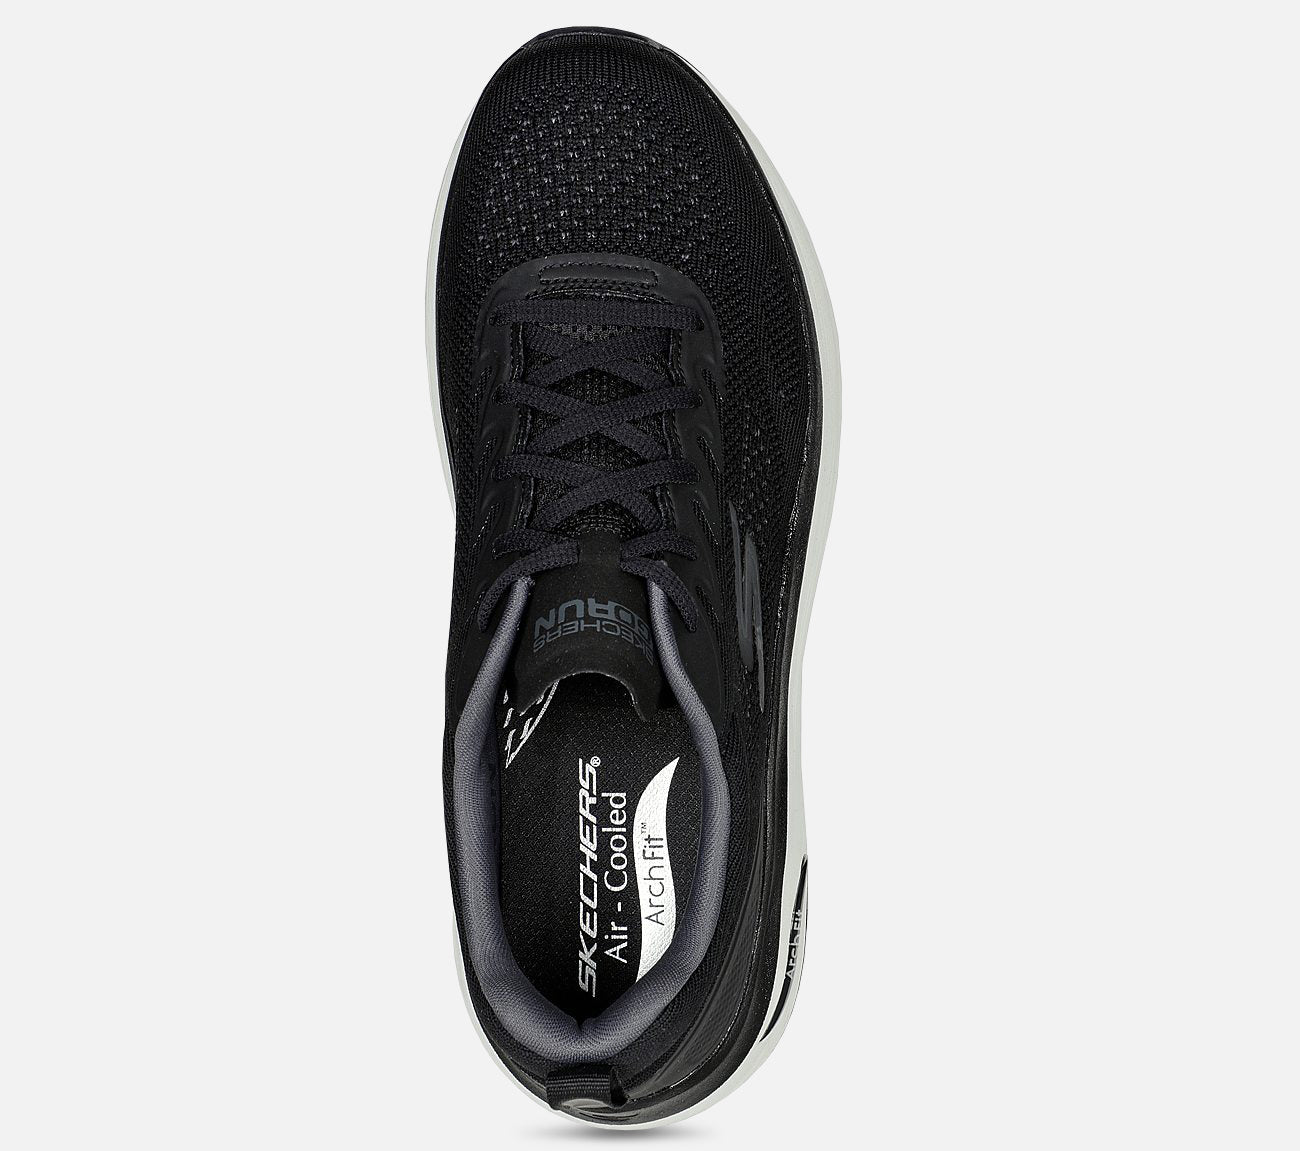 Cushioning Arch Fit - Hand – Skechers.dk